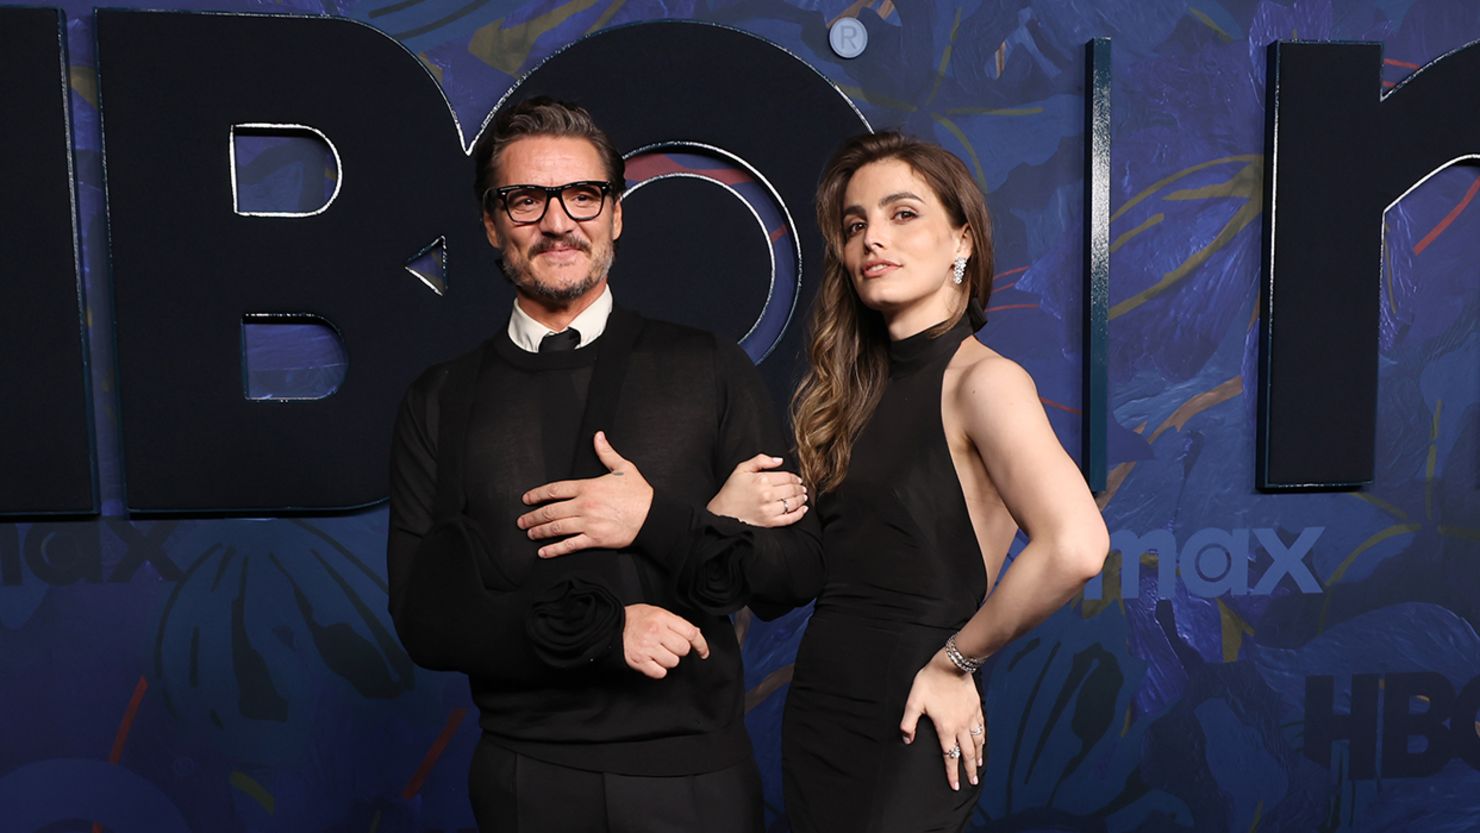 Lux Pascal, trans actress and model, was brother Pedro Pascal’s date to